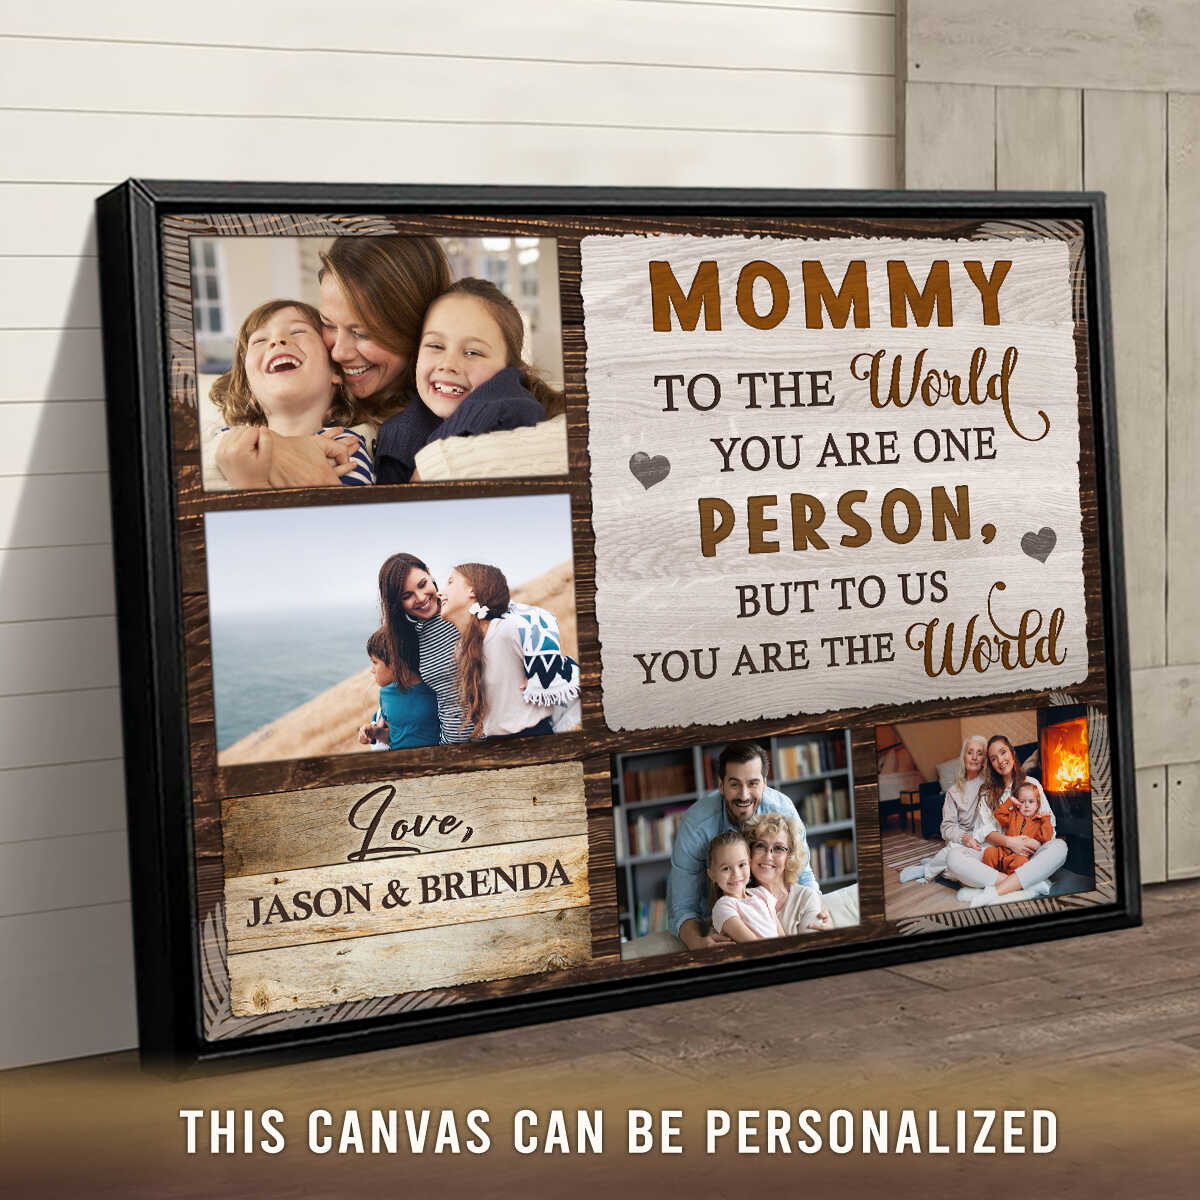 https://images.ohcanvas.com/ohcanvas_com/2022/04/18005030/mothers-day-canvas-art-gift-idea-personalized-photo-gift-for-mom-canvas02.jpg